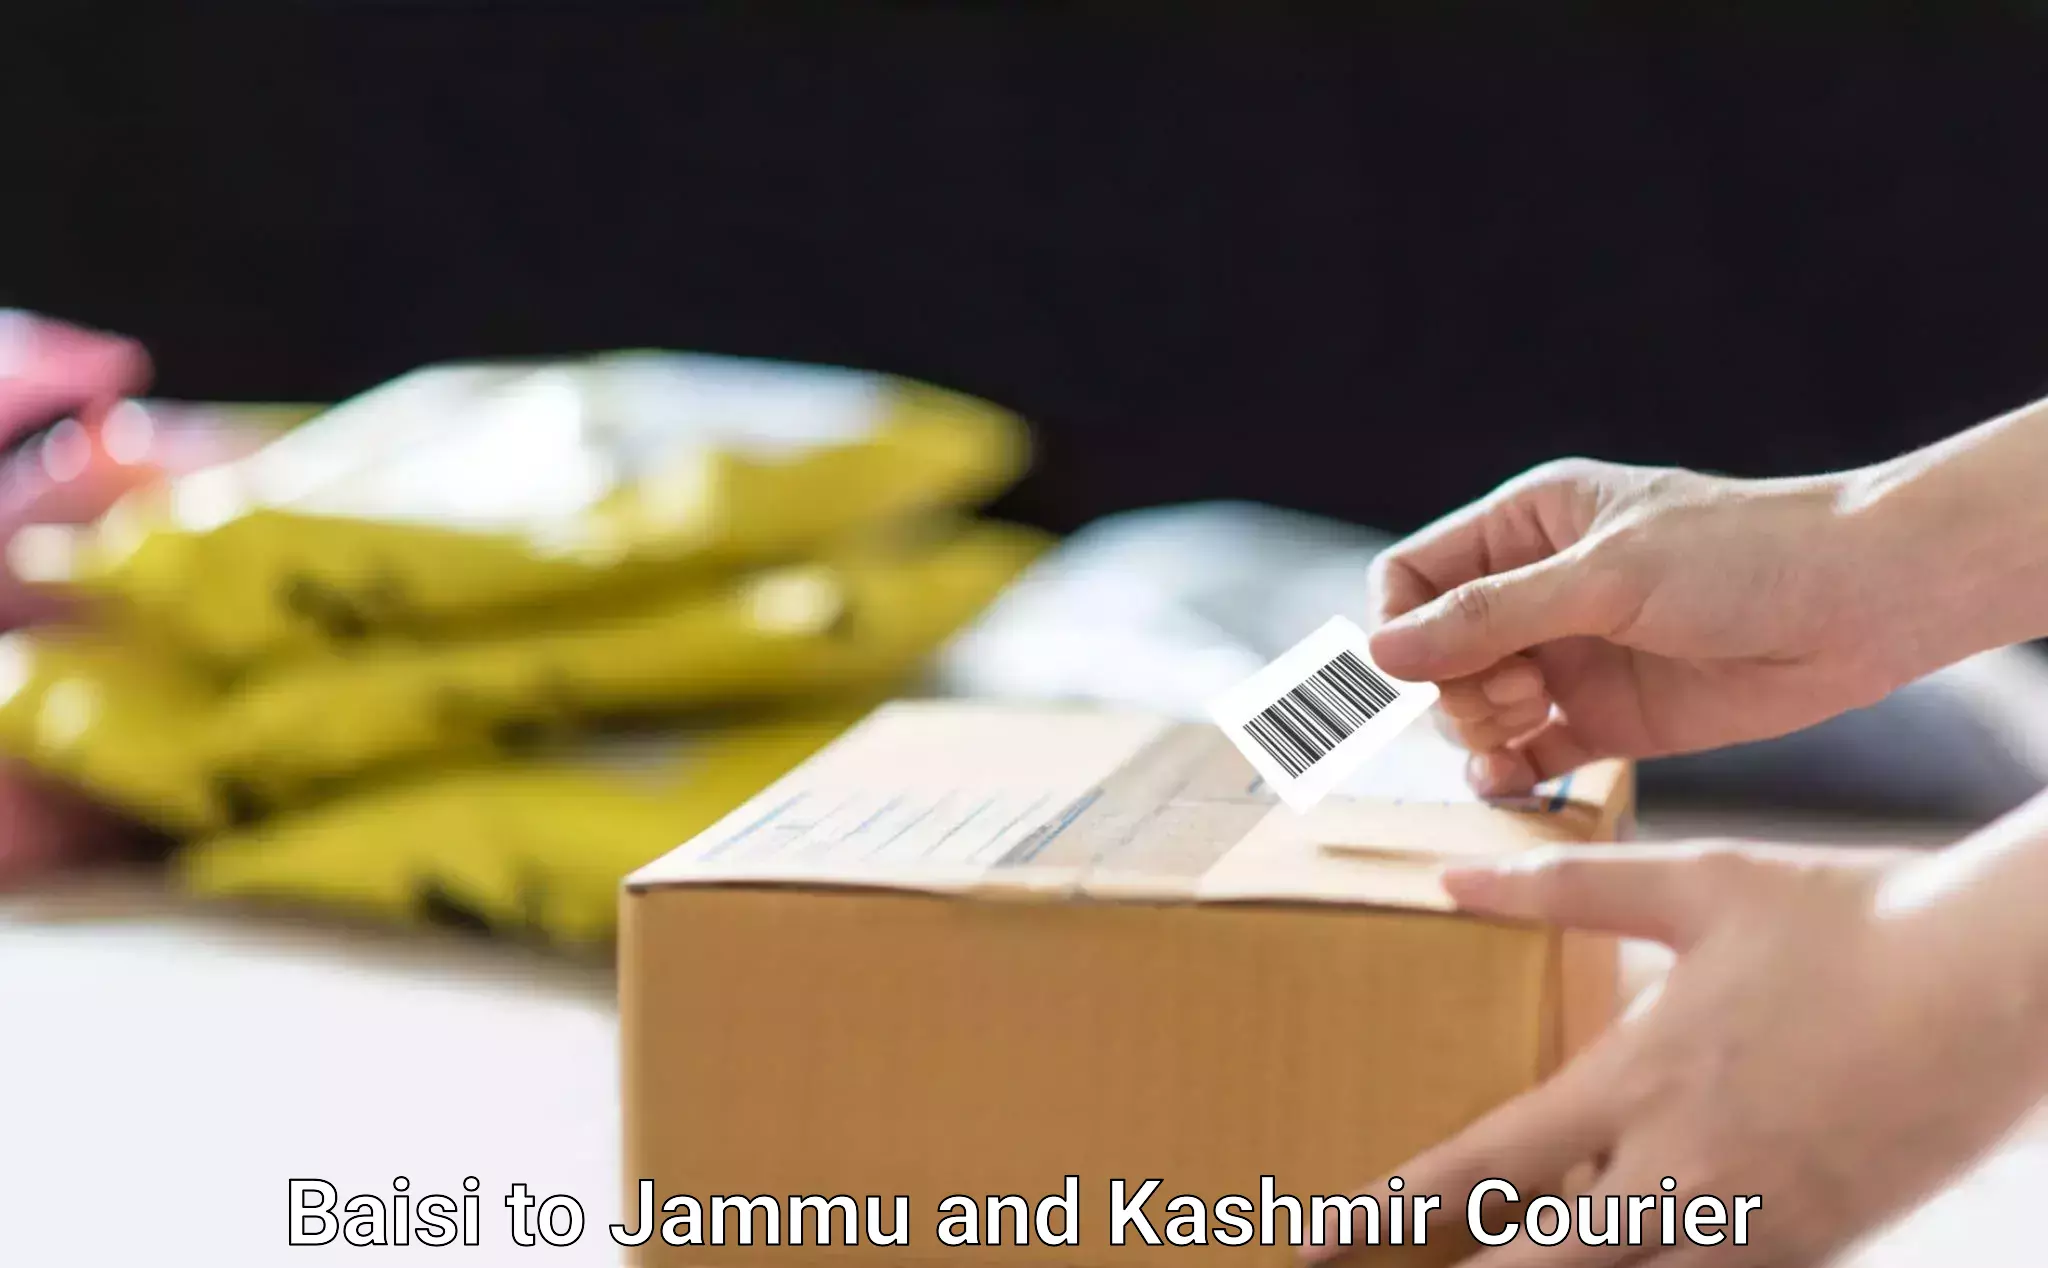 Trusted moving company Baisi to Jammu and Kashmir